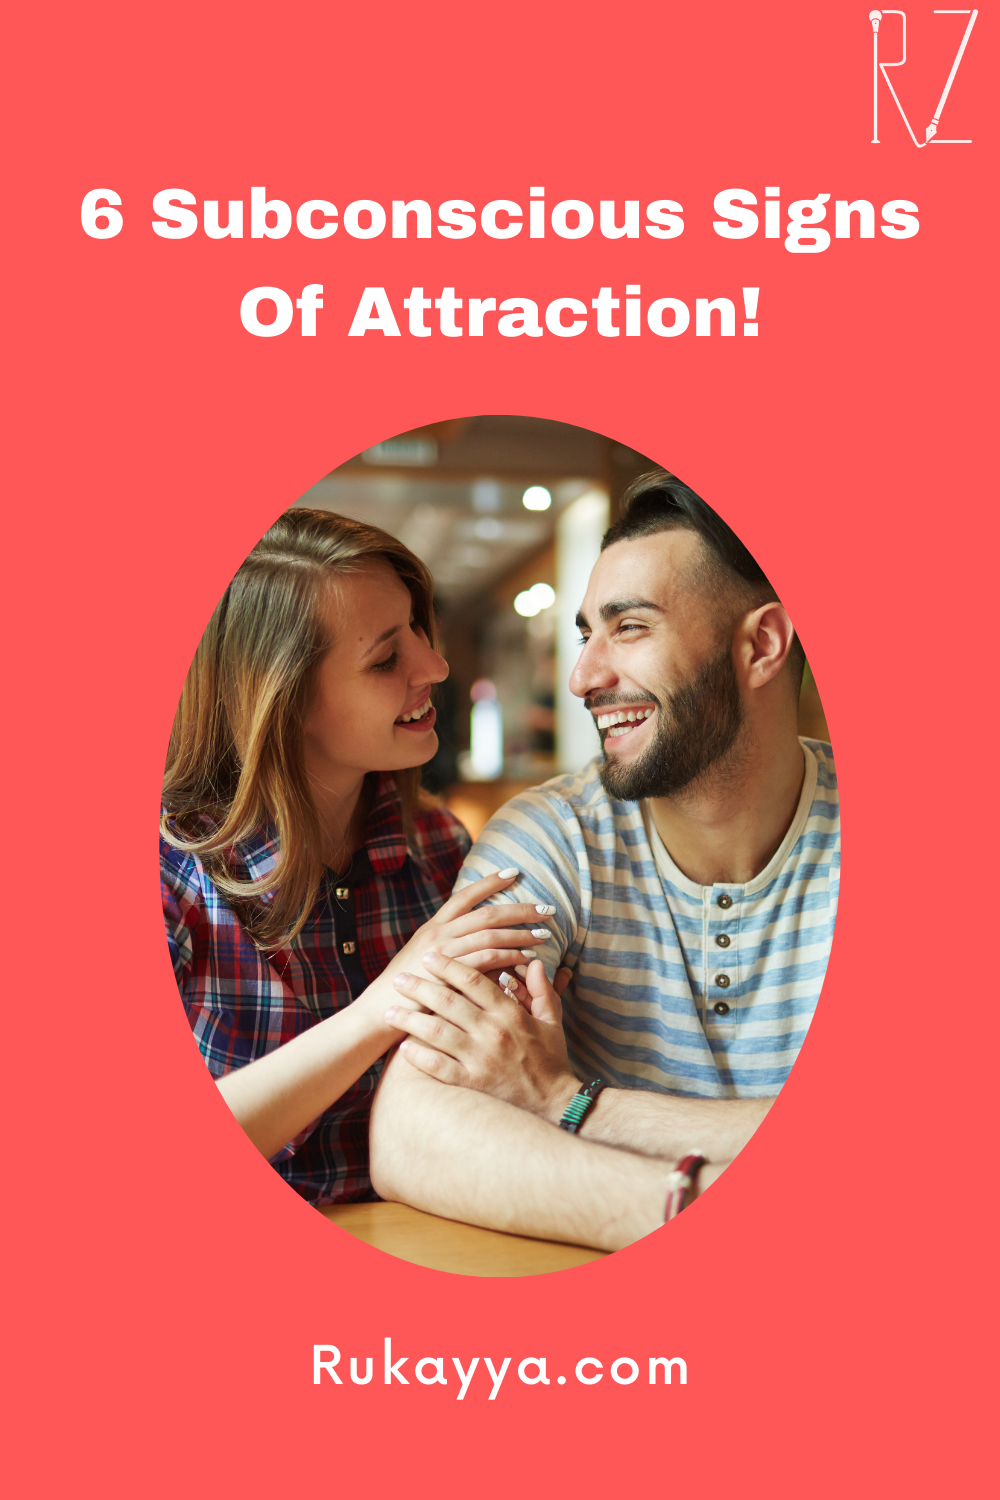 Subconscious signs of attraction, signs of attraction between two females, intense attraction signs